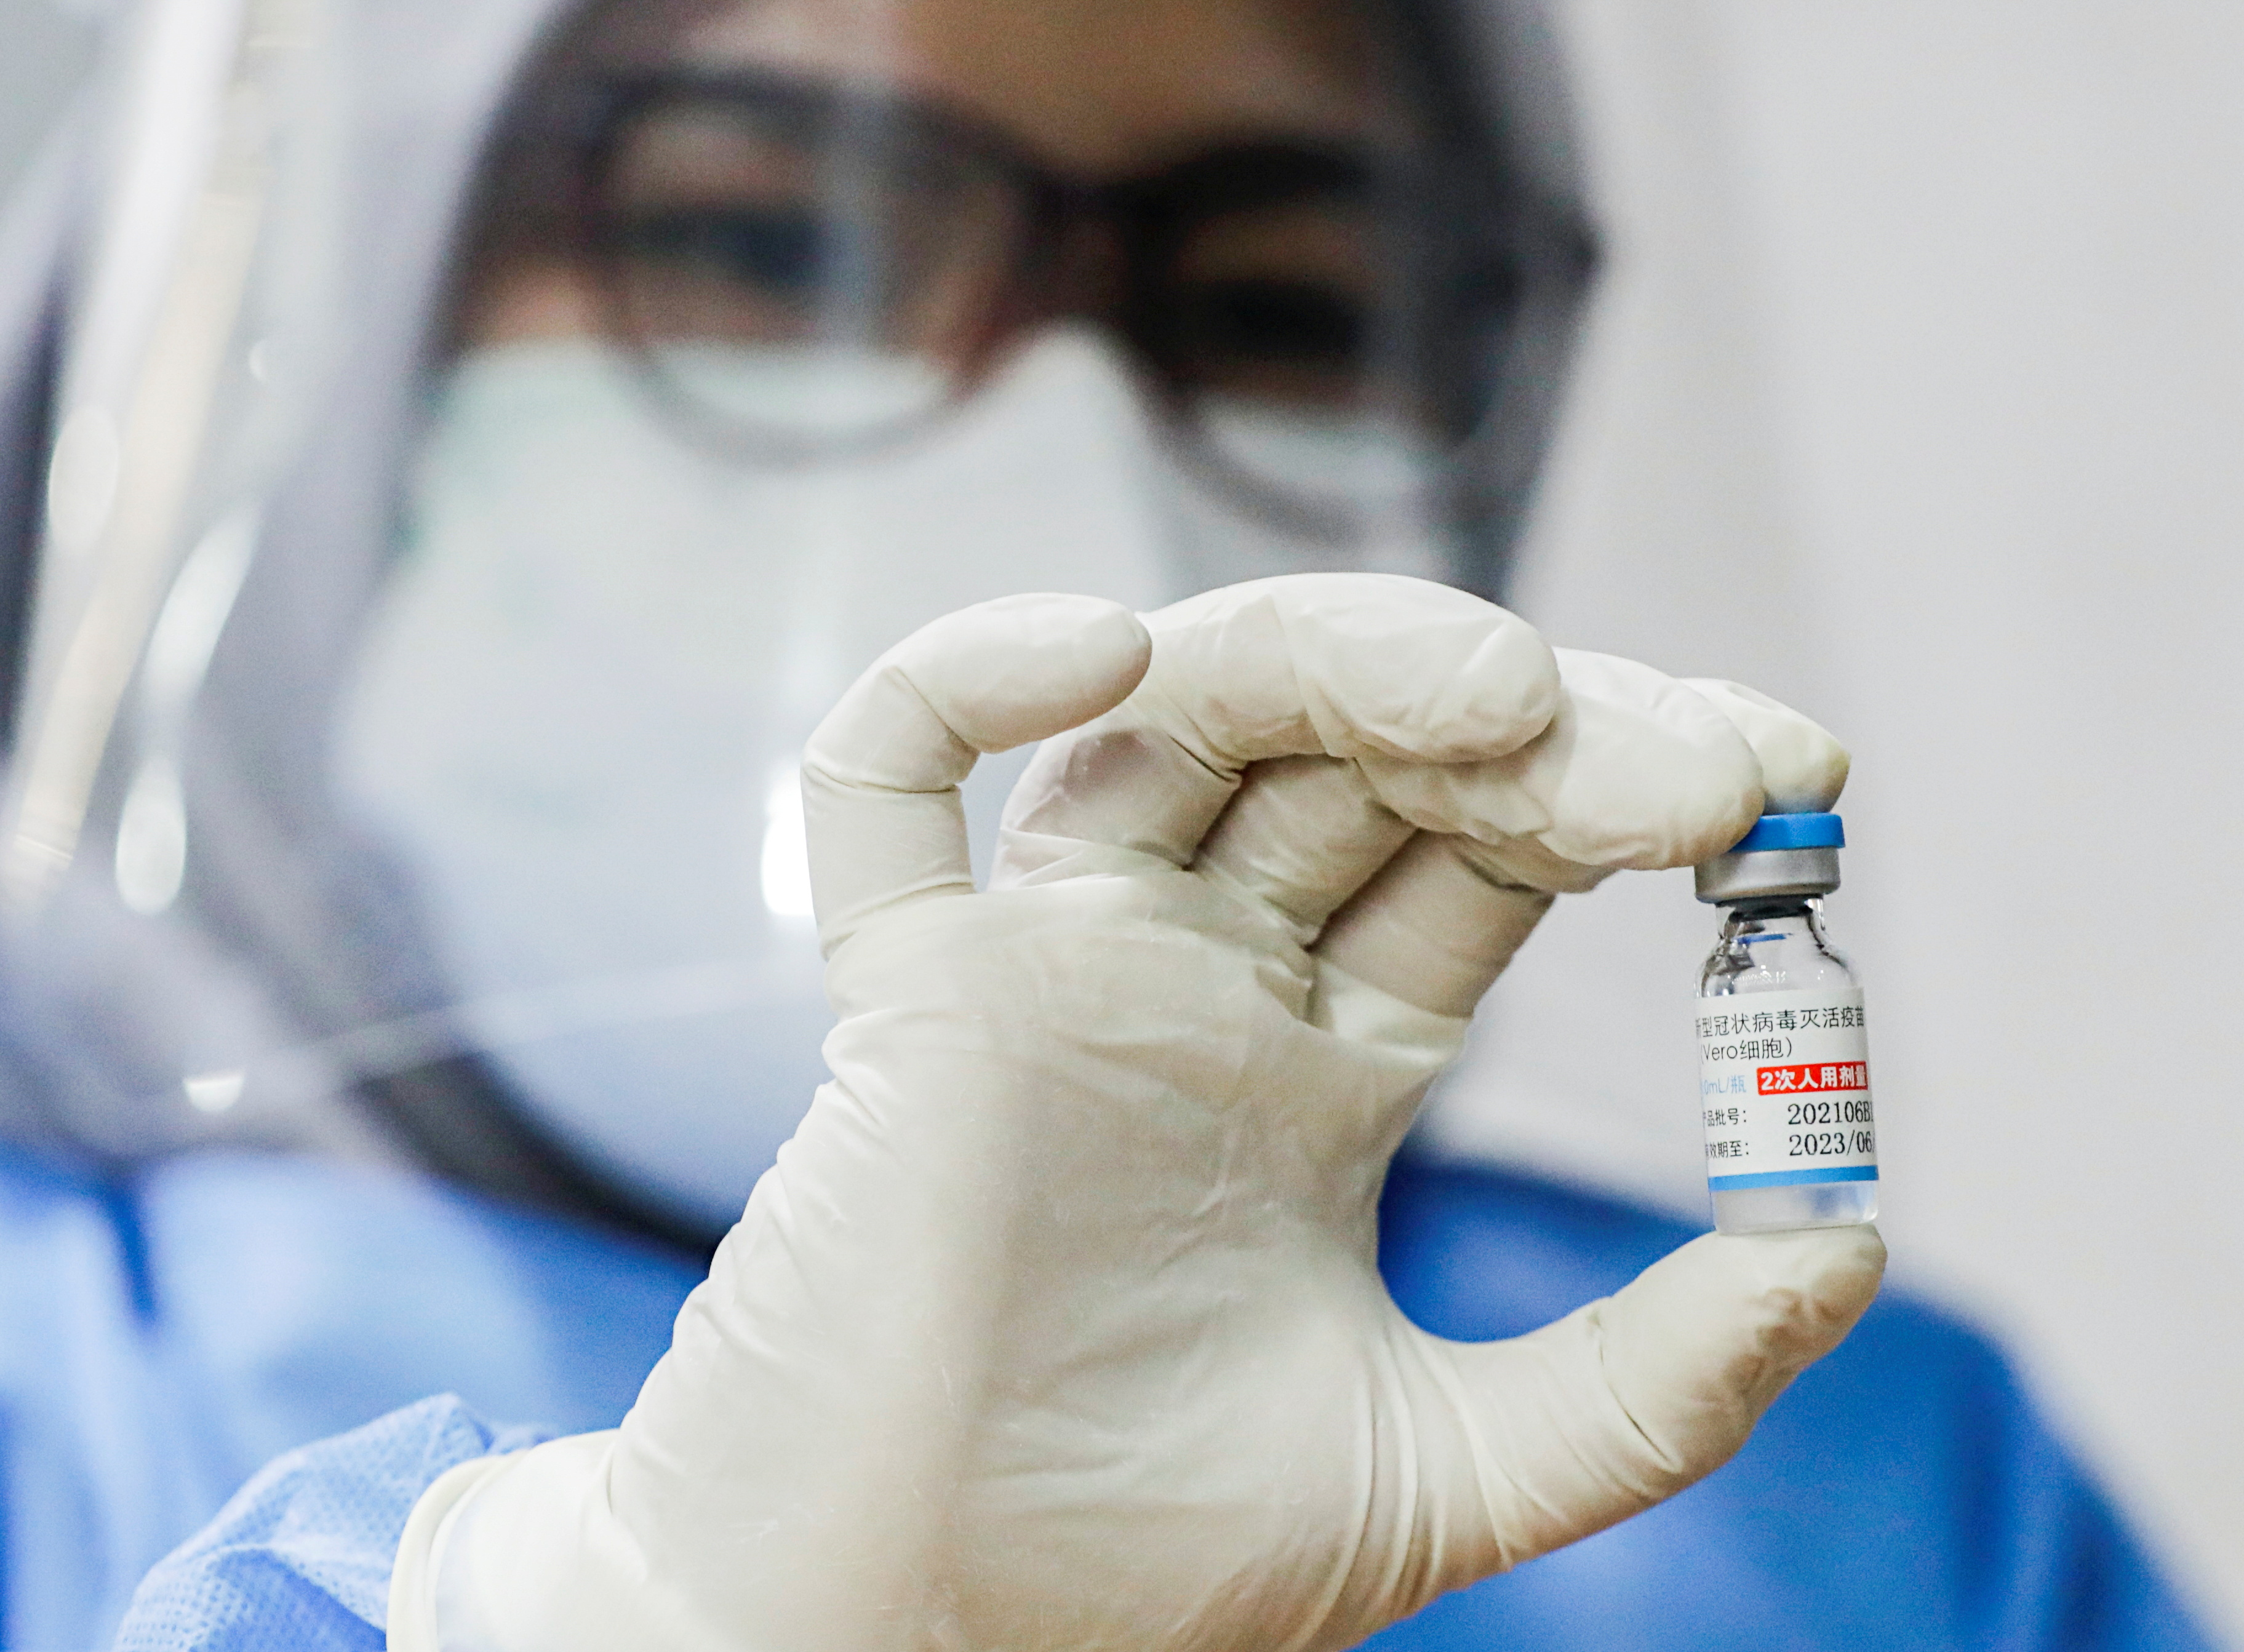 A healthcare worker shows a dose of Sinopharm vaccine against the coronavirus disease (COVID-19) during a mass vaccination program for foreigners in Jakarta, Indonesia, August 24, 2021. REUTERS/Ajeng Dinar Ulfiana/File Photo